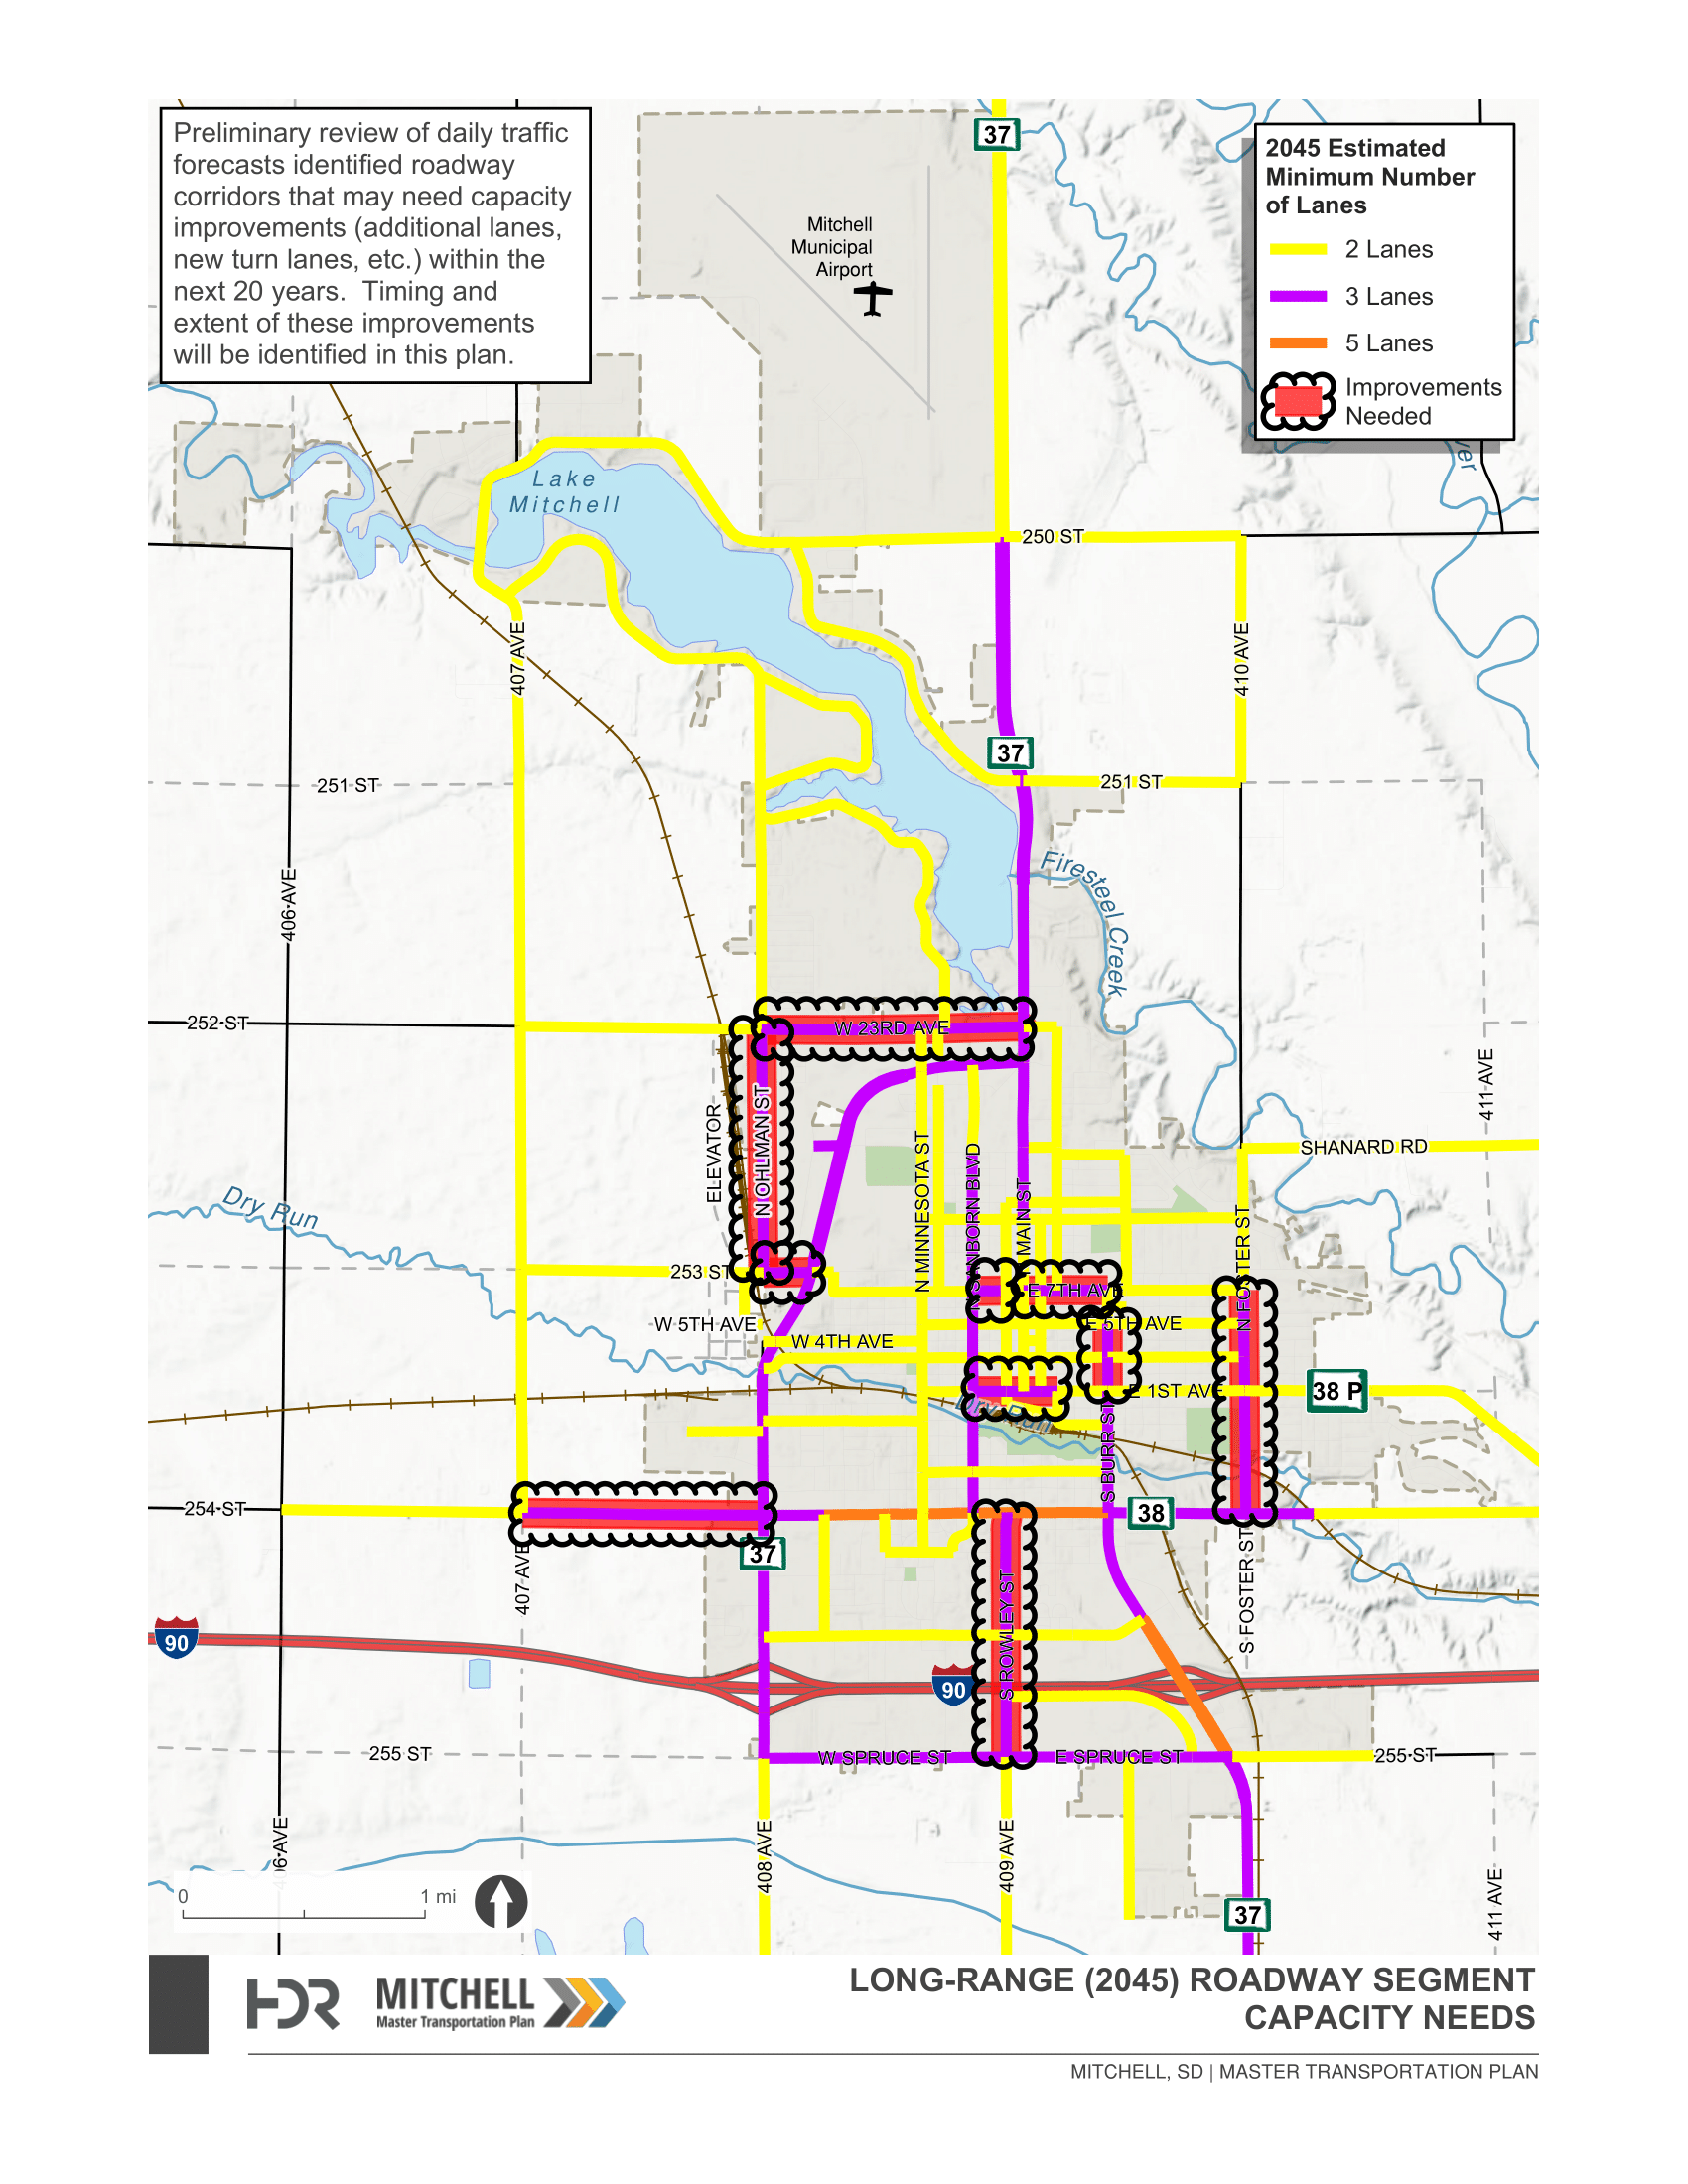 Summary of potential roadway improvement needs in terms of ‘number of lanes’ along a roadway segment based on forecasted traffic volumes.  Roadway segments with a thick red outline reflect long-range needs for additional lanes based on anticipated traffic growth and development over the next 20 years.  